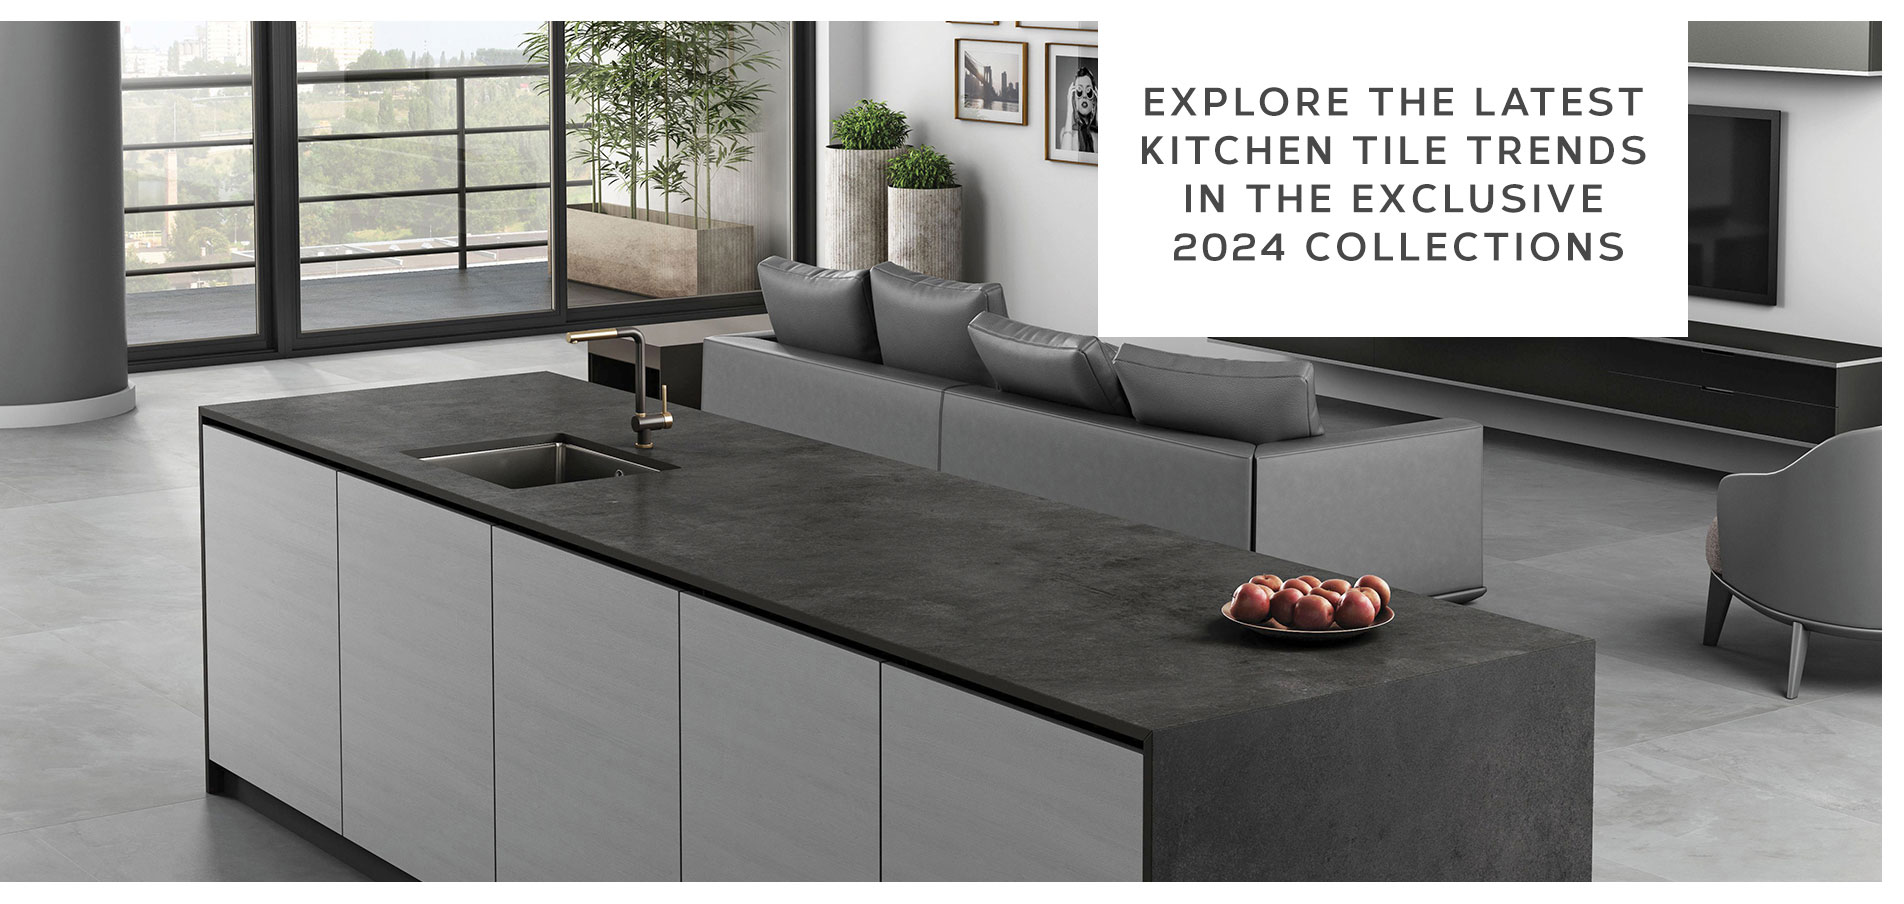 Explore The Latest Kitchen Tile Trends In The EXclusive 2024 Collections